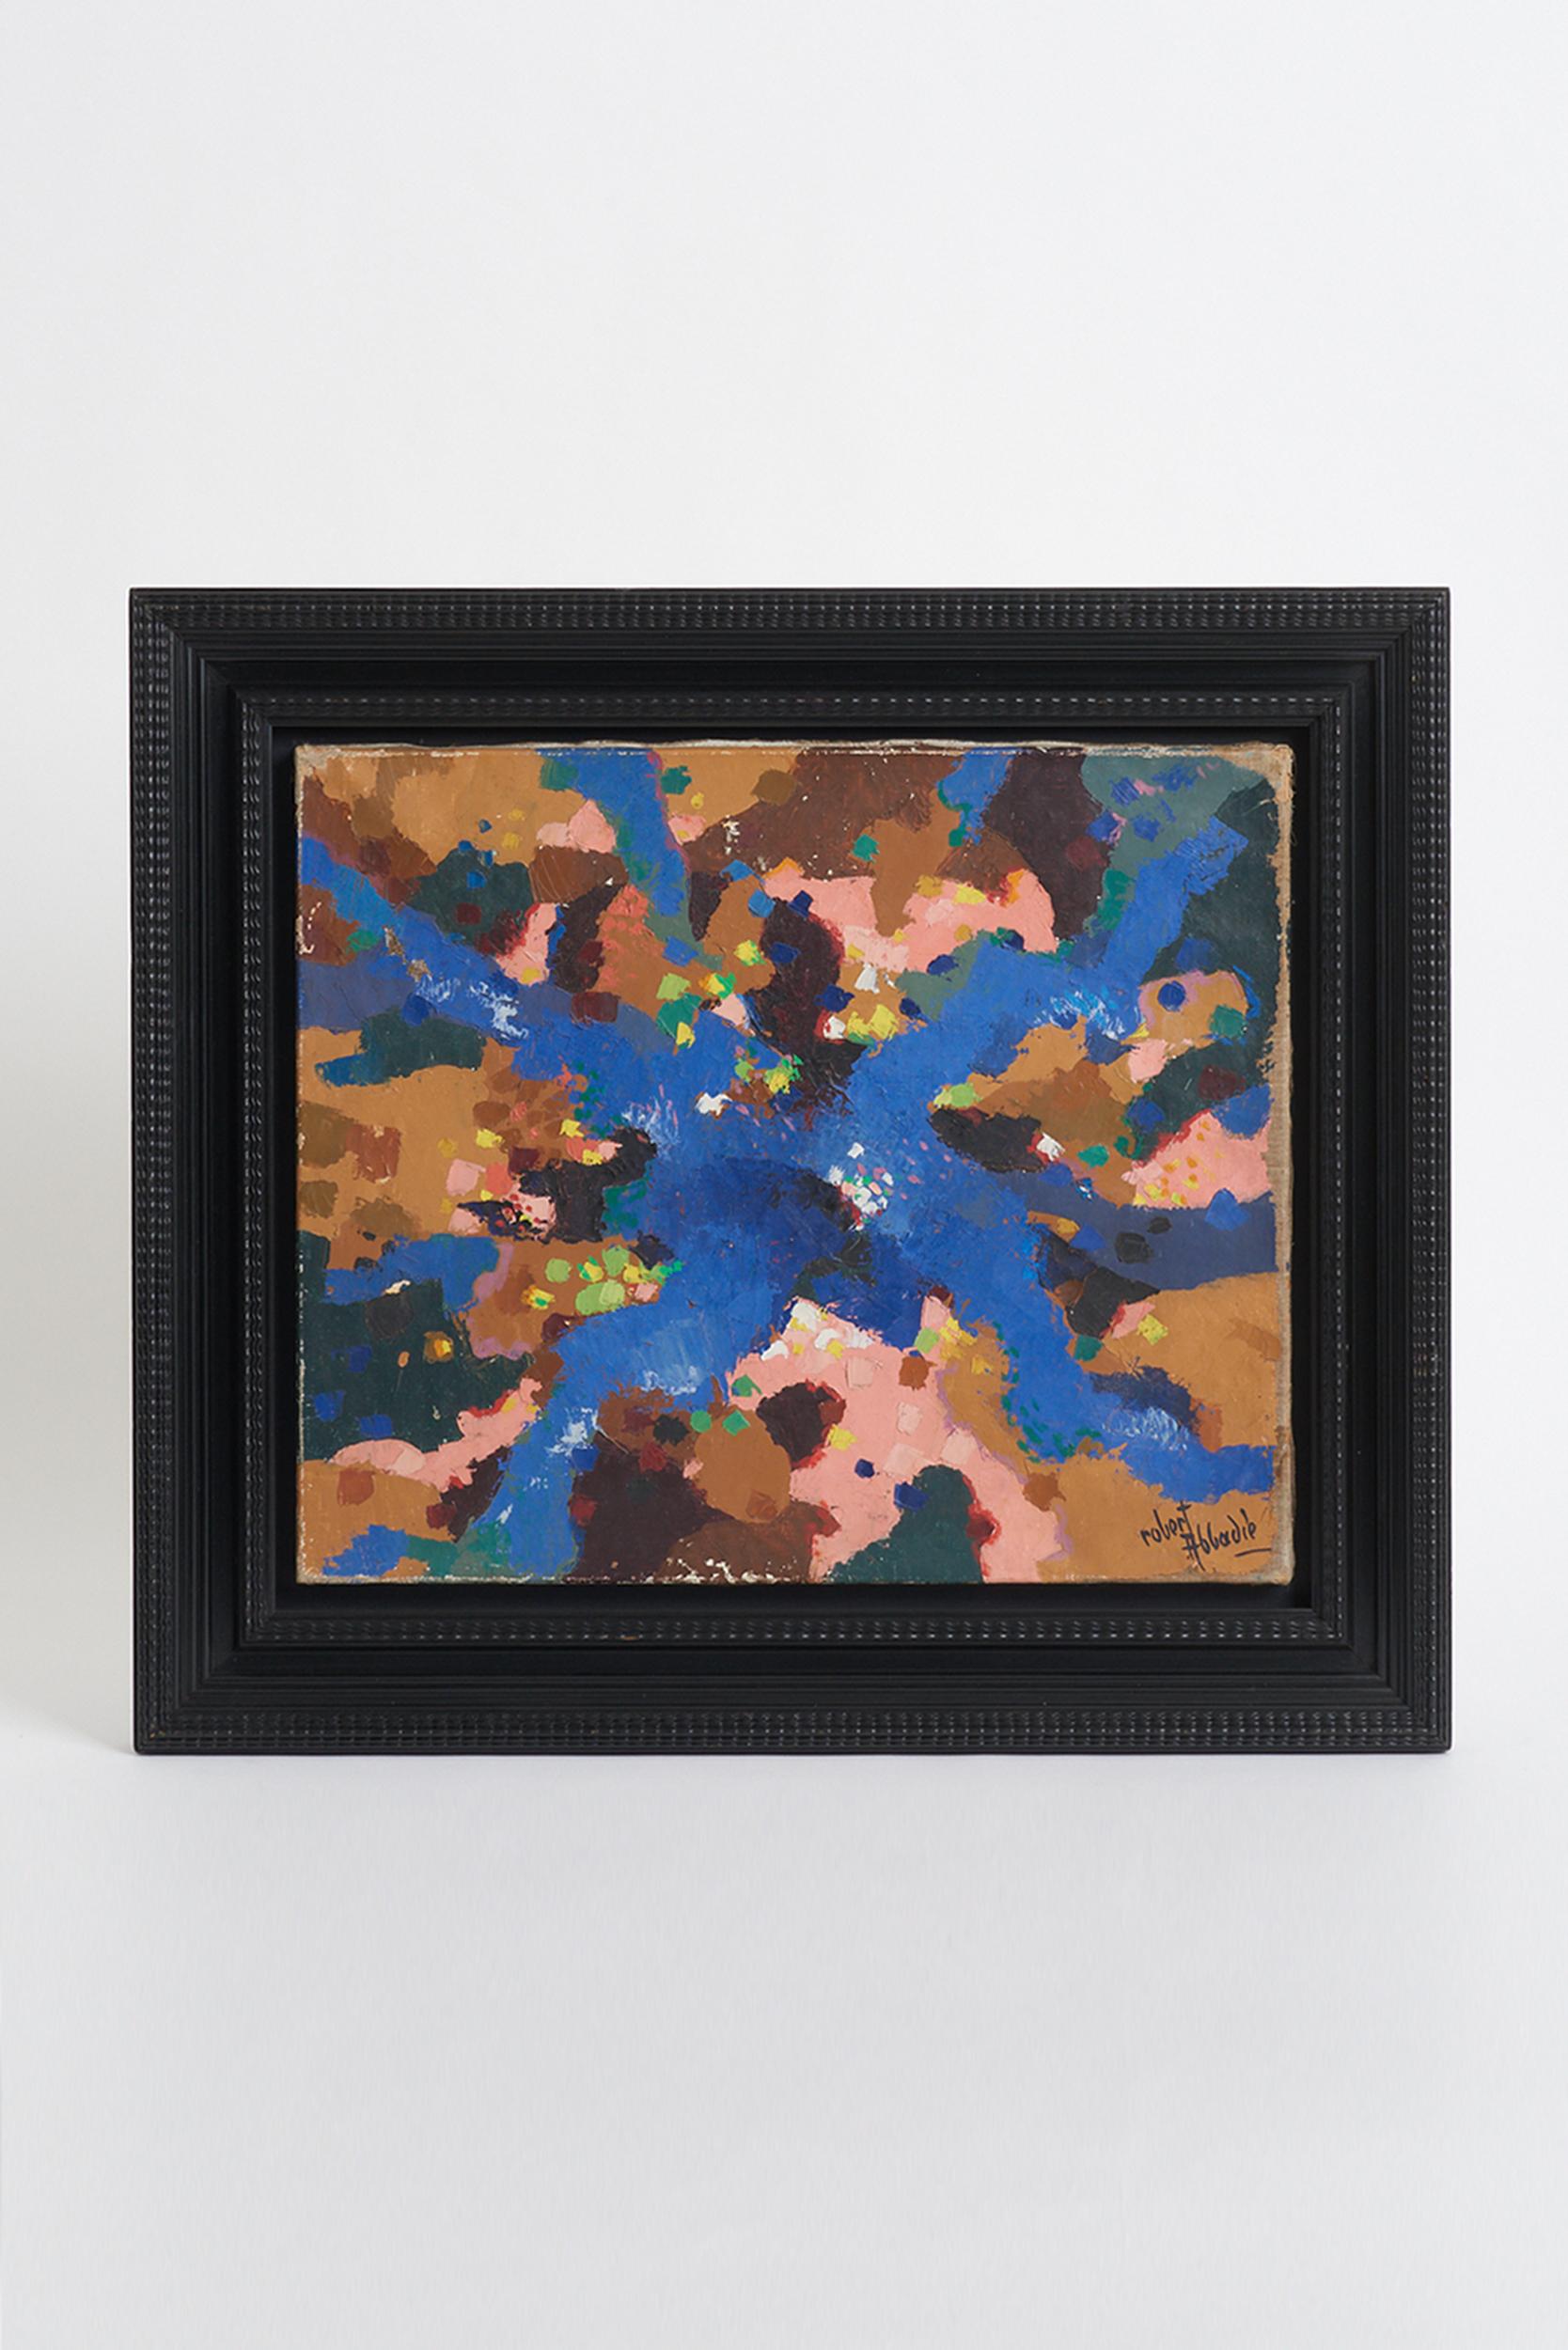 An abstract painting, signed Robert Abbadie.
Polychrome oil on canvas.
France, Mid-20th Century.